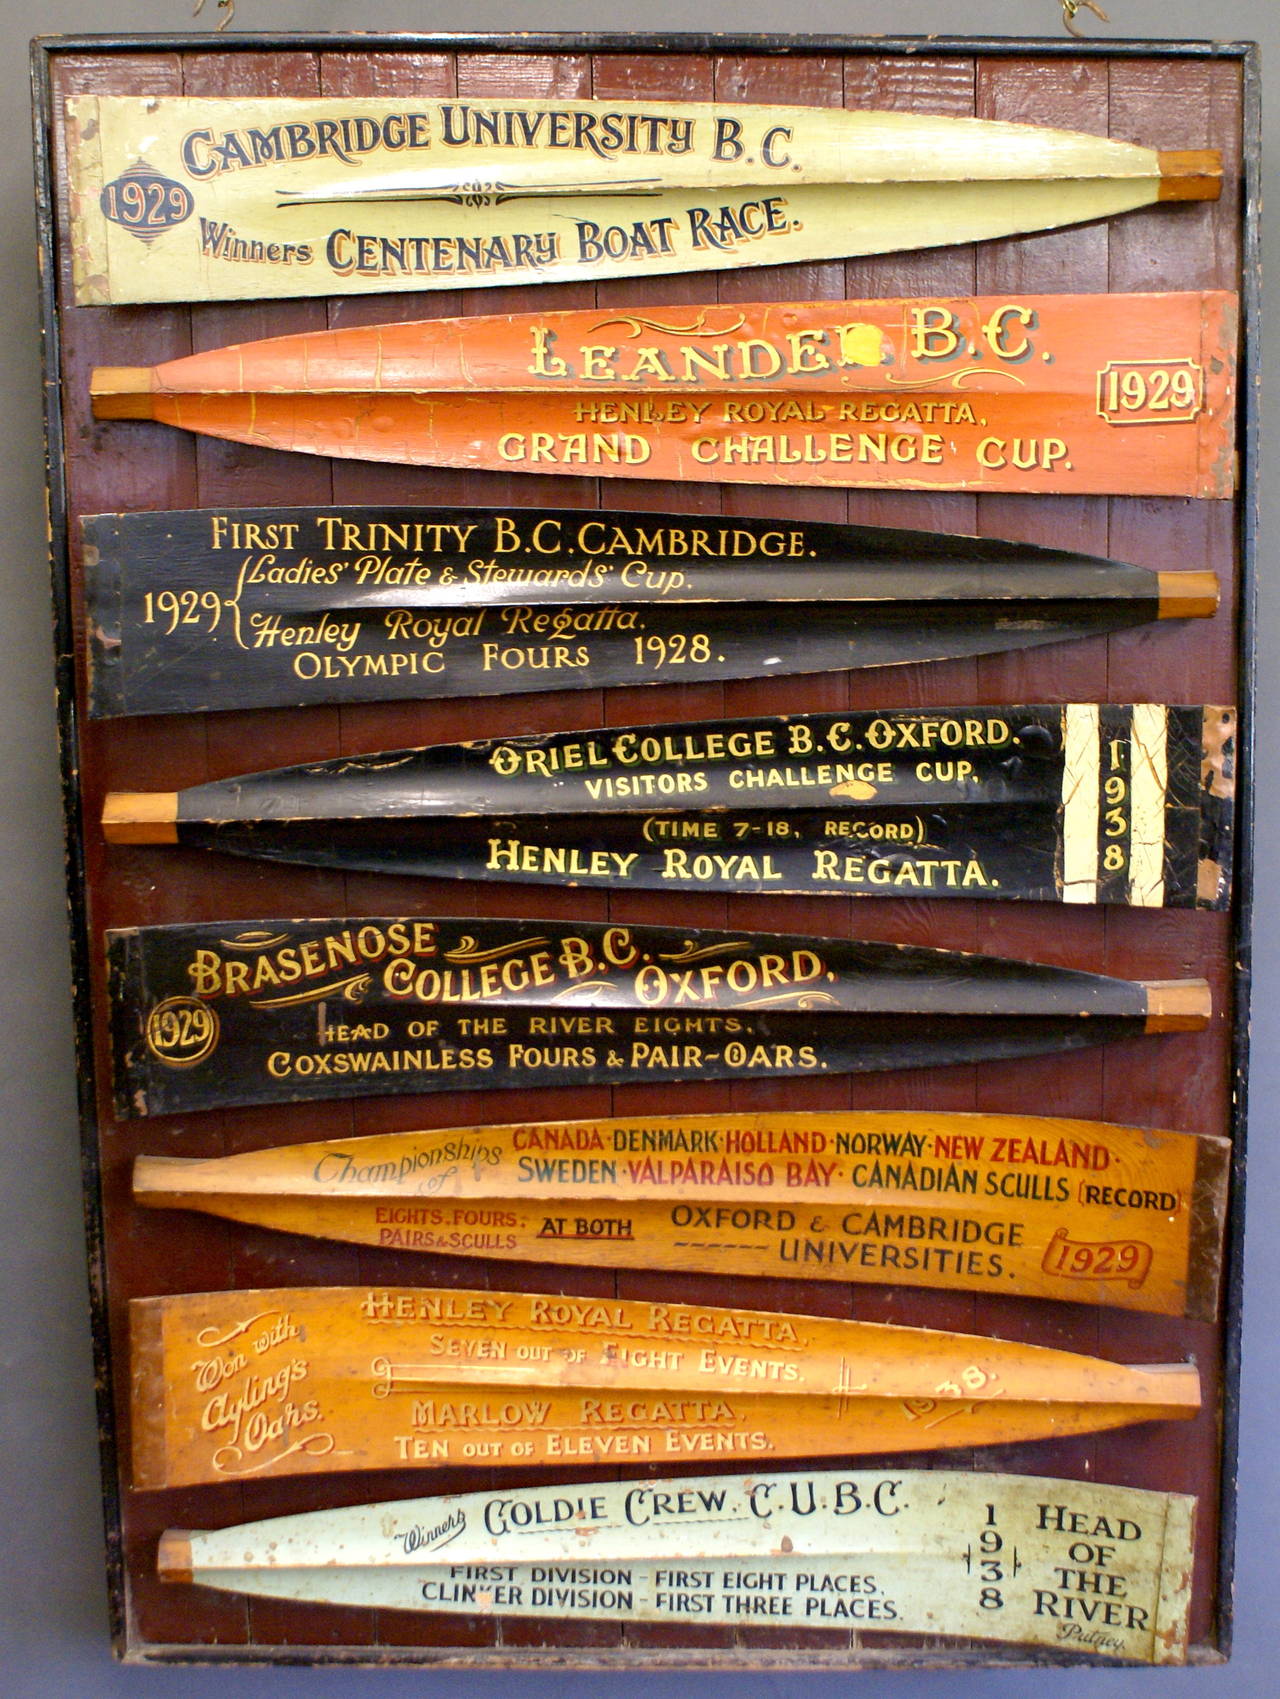 Including the Cambridge Centenary winners oar from 1929, an Oxford blade and several from the Henley Regatta. All the blades come from the 1929 and 1938 seasons and are mounted on painted board. This decorative and interesting item was sourced from